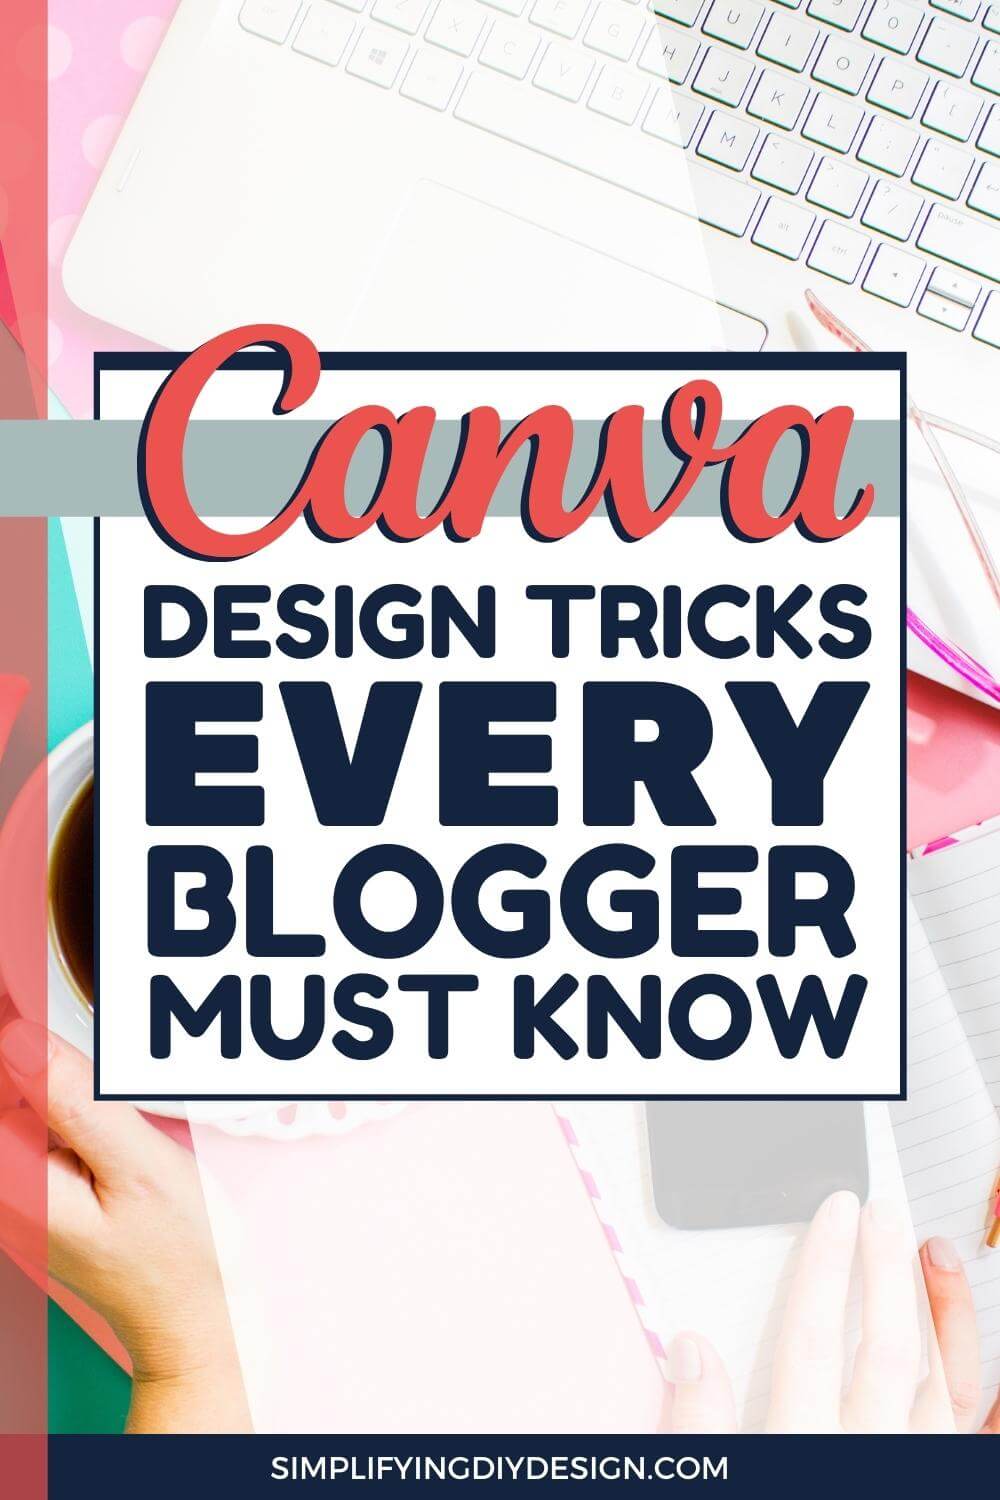 These game-changing Canva design tips help you create amazing graphics in Canva FAST! Boost your productivity and cut your Canva design time in half!